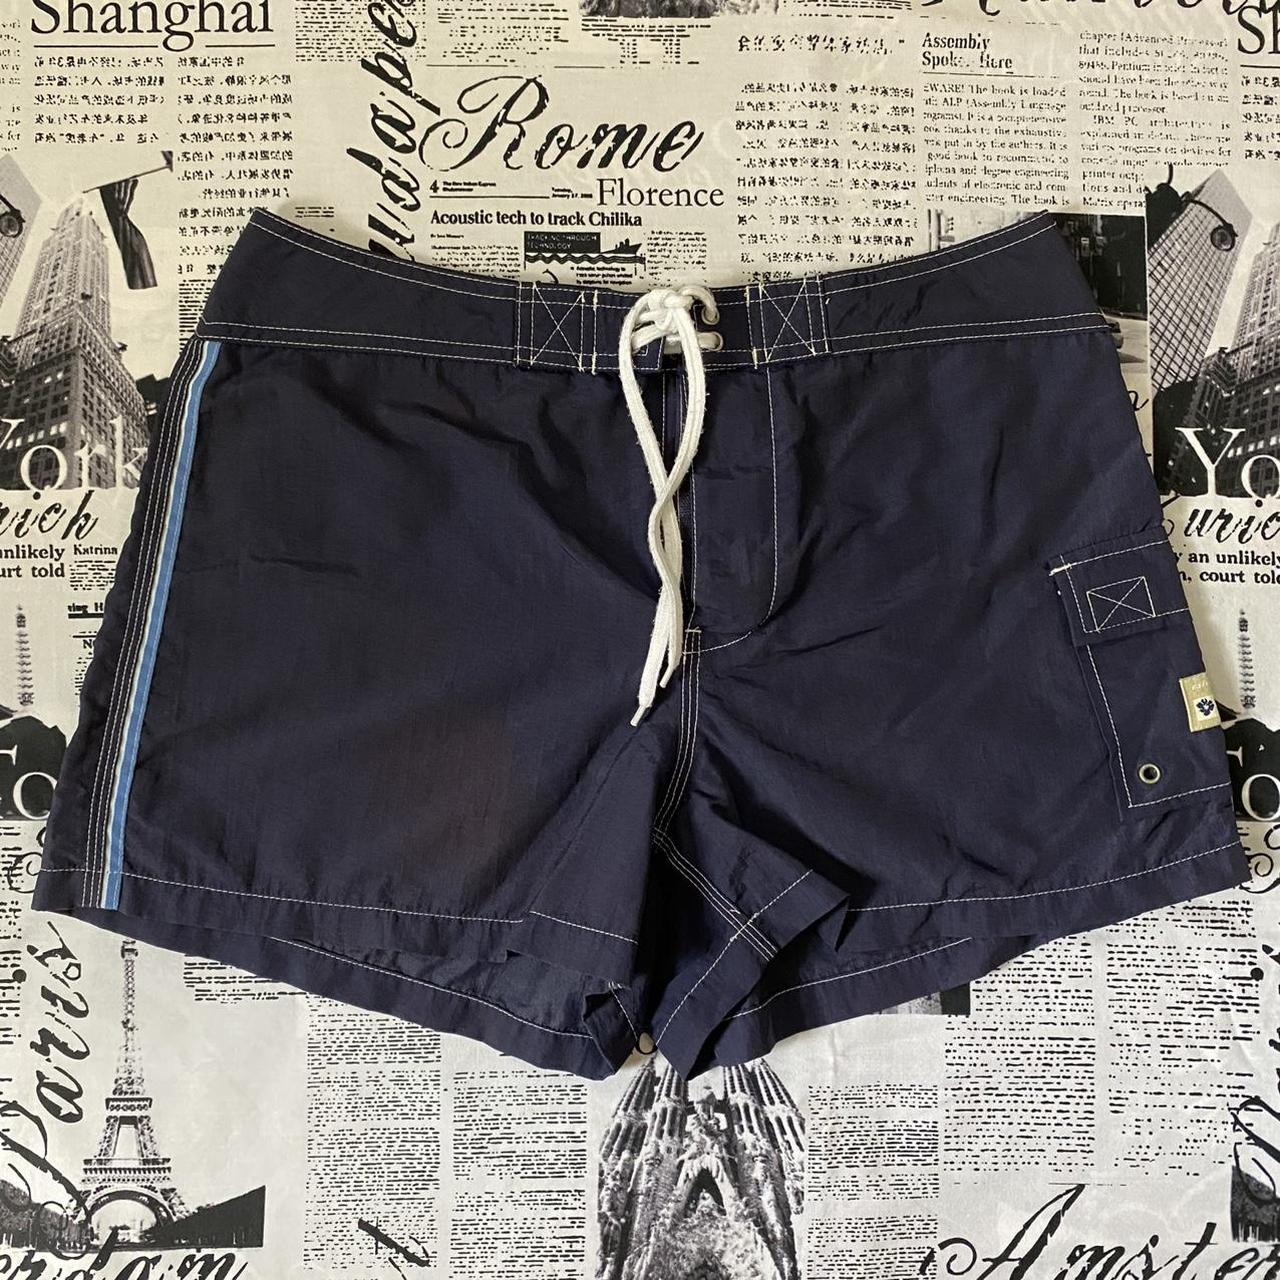 These swim shorts from Old Navy are pretty cool!... - Depop